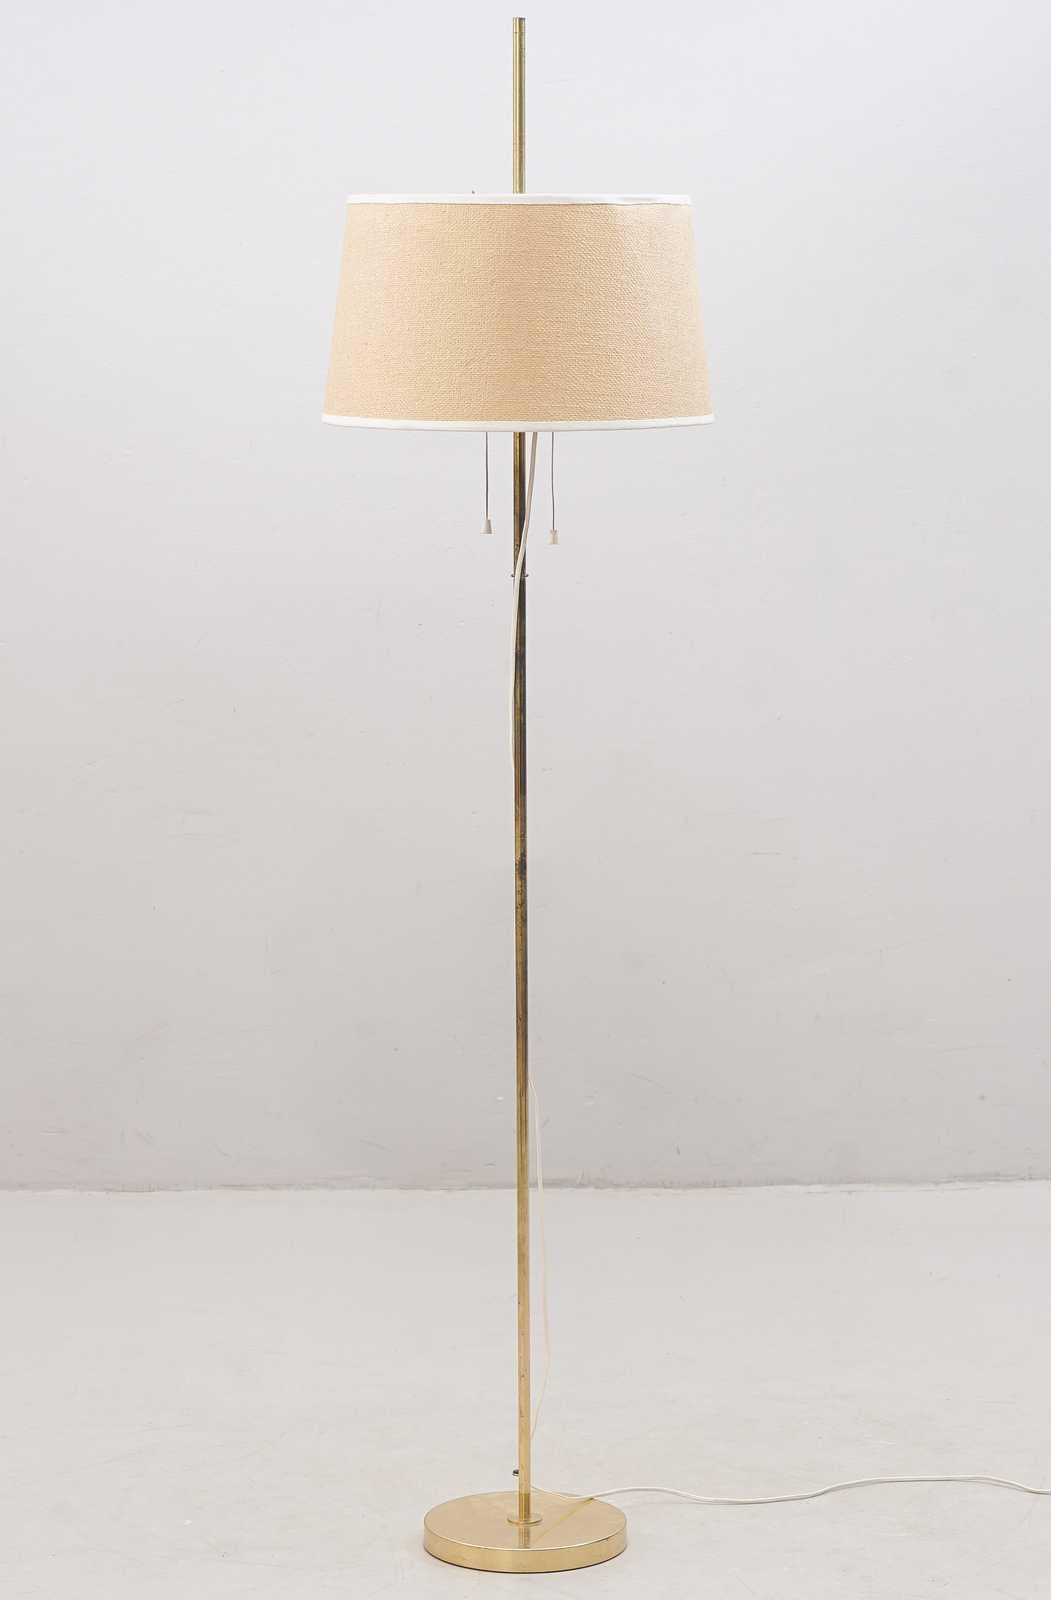 The floor lamp is made of brass, original lampshade with 2 lamp holders. The lampshade is adjustable in height.  

 
DIMENSIONS:  
Height: 162 cm 
Diameter lampshade: 41 cm 
 